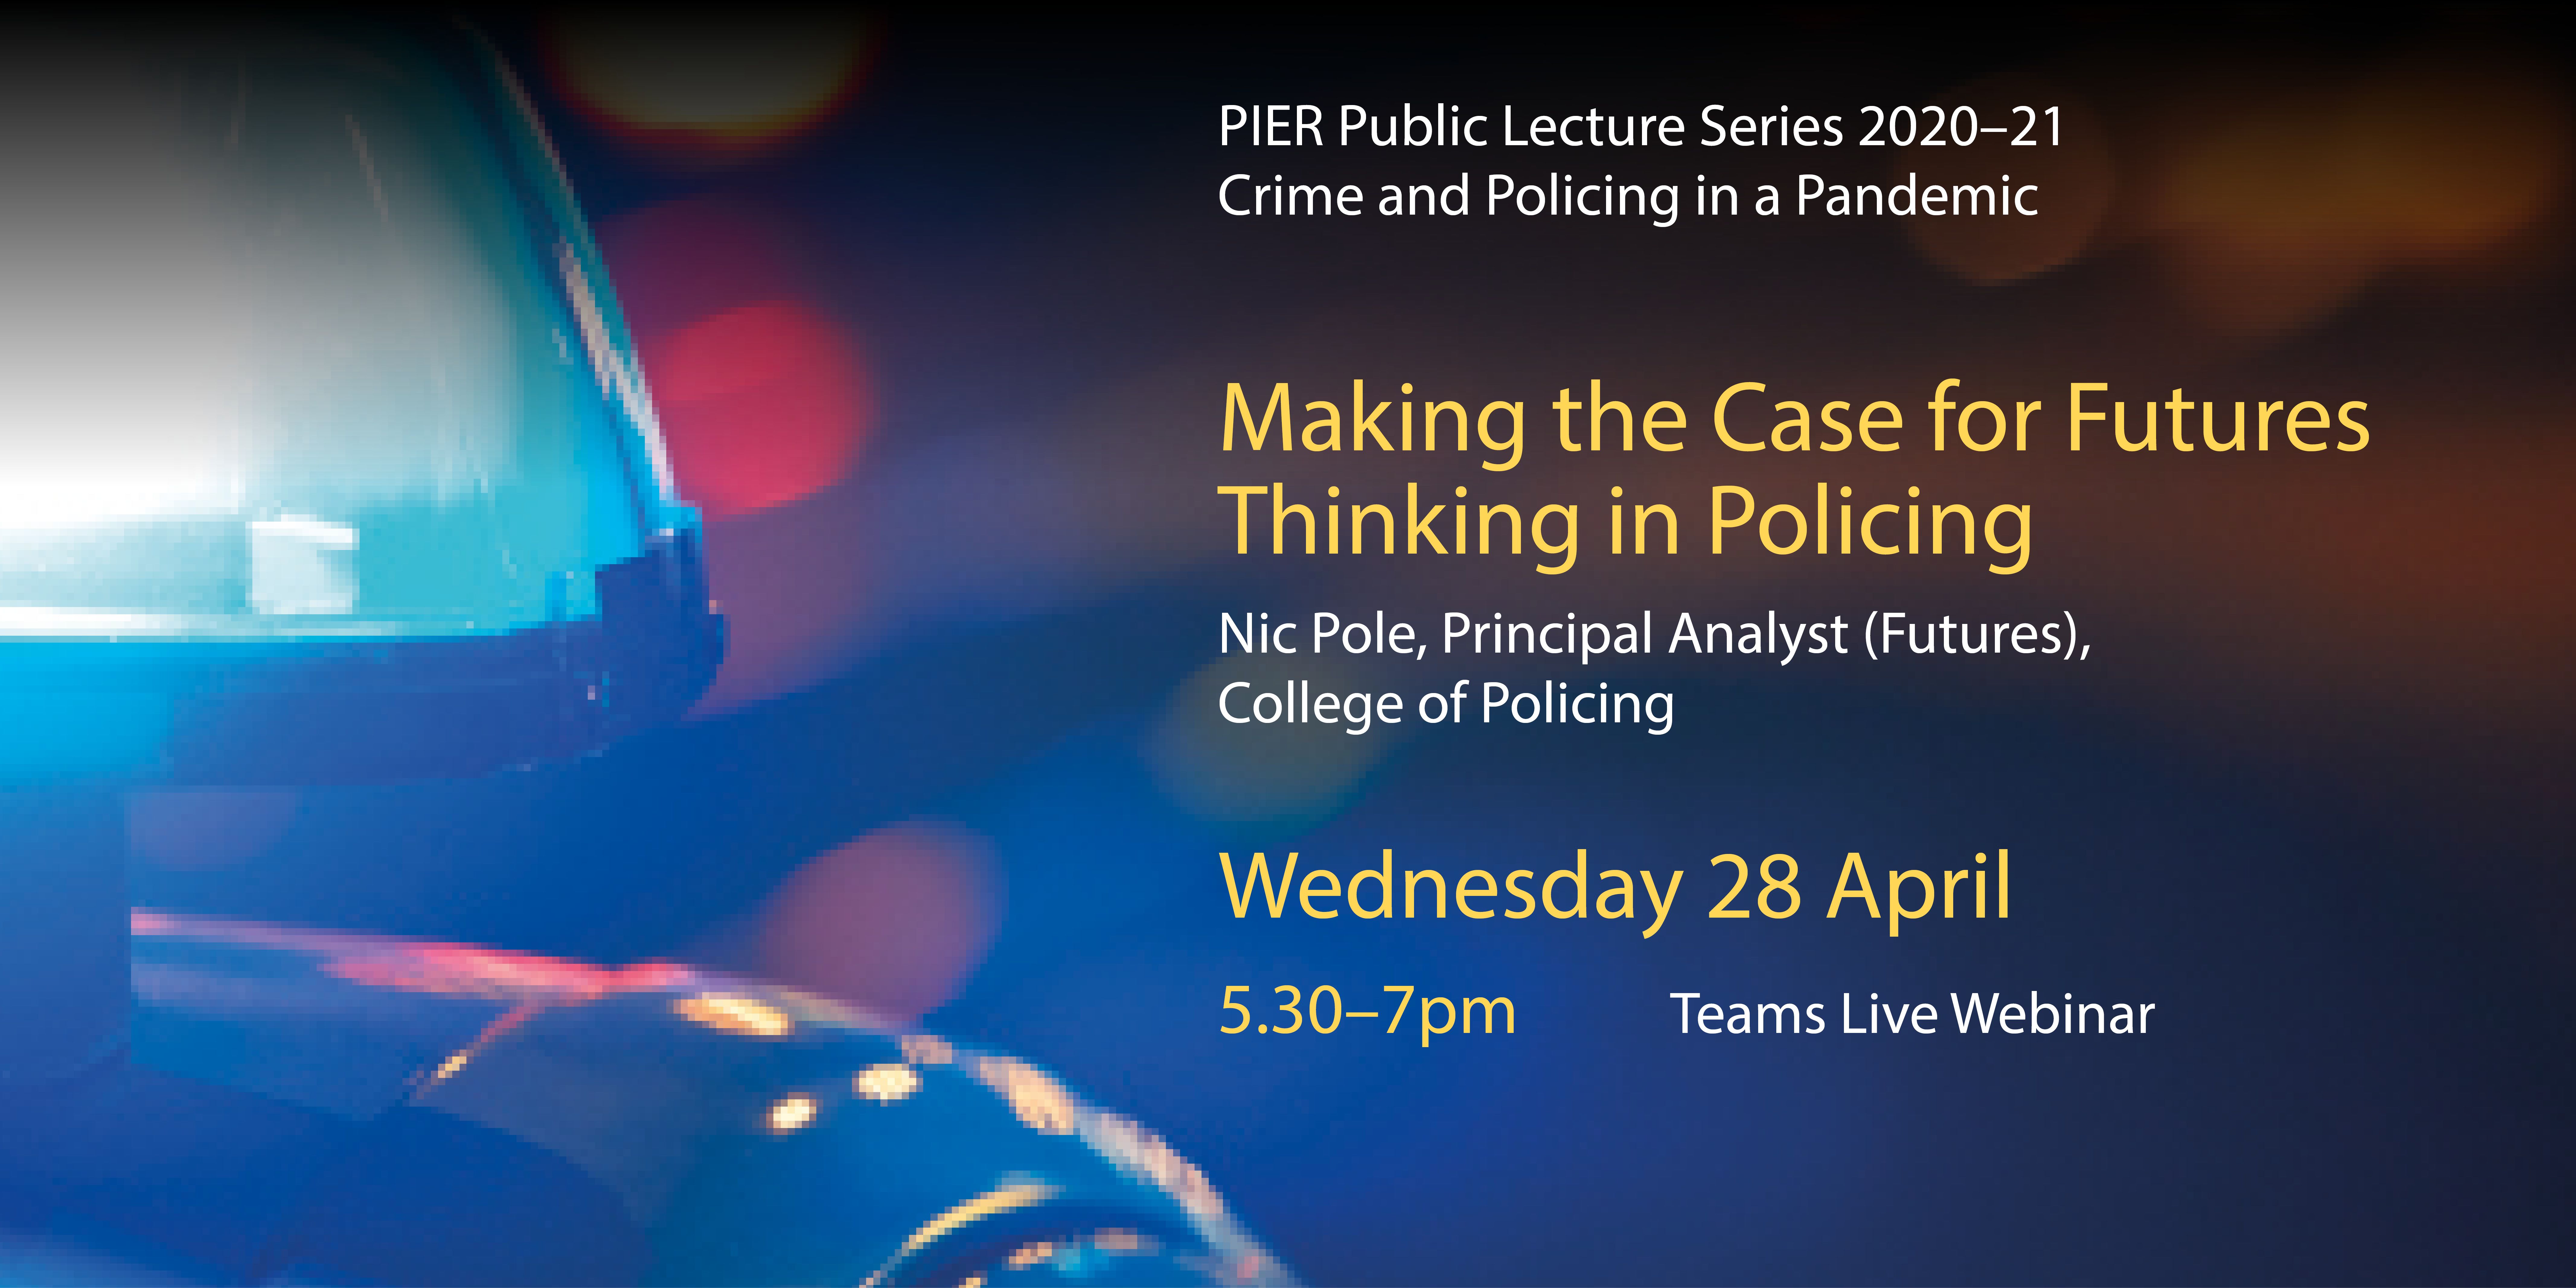 Making the Case for Futures Thinking in Policing event poster with text.